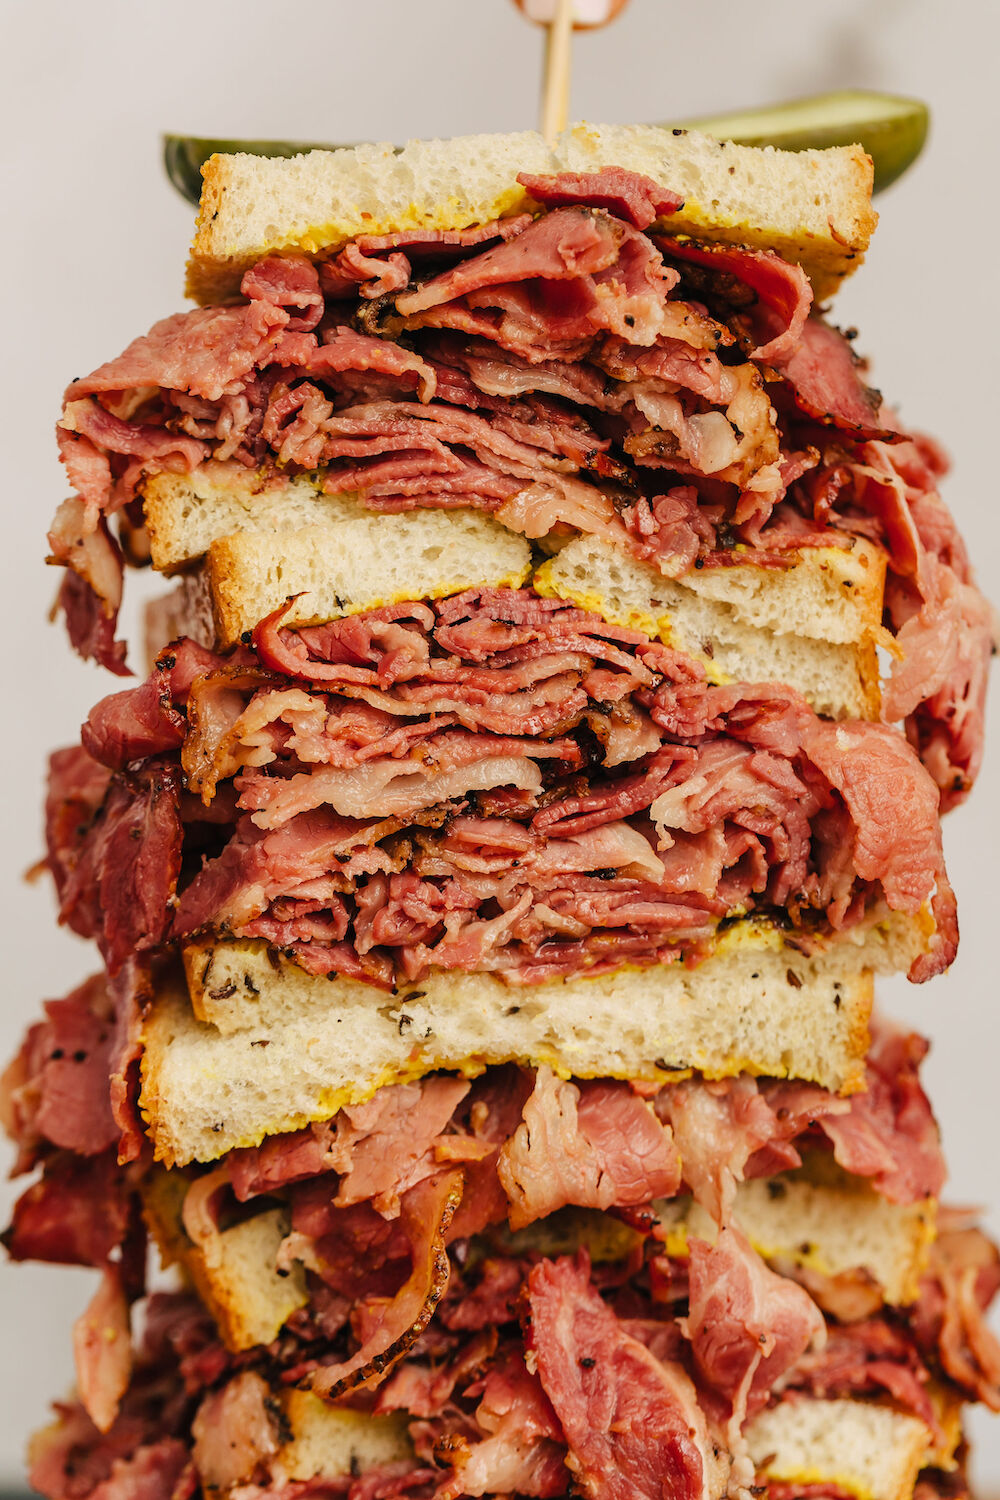 The Pastrami Stand